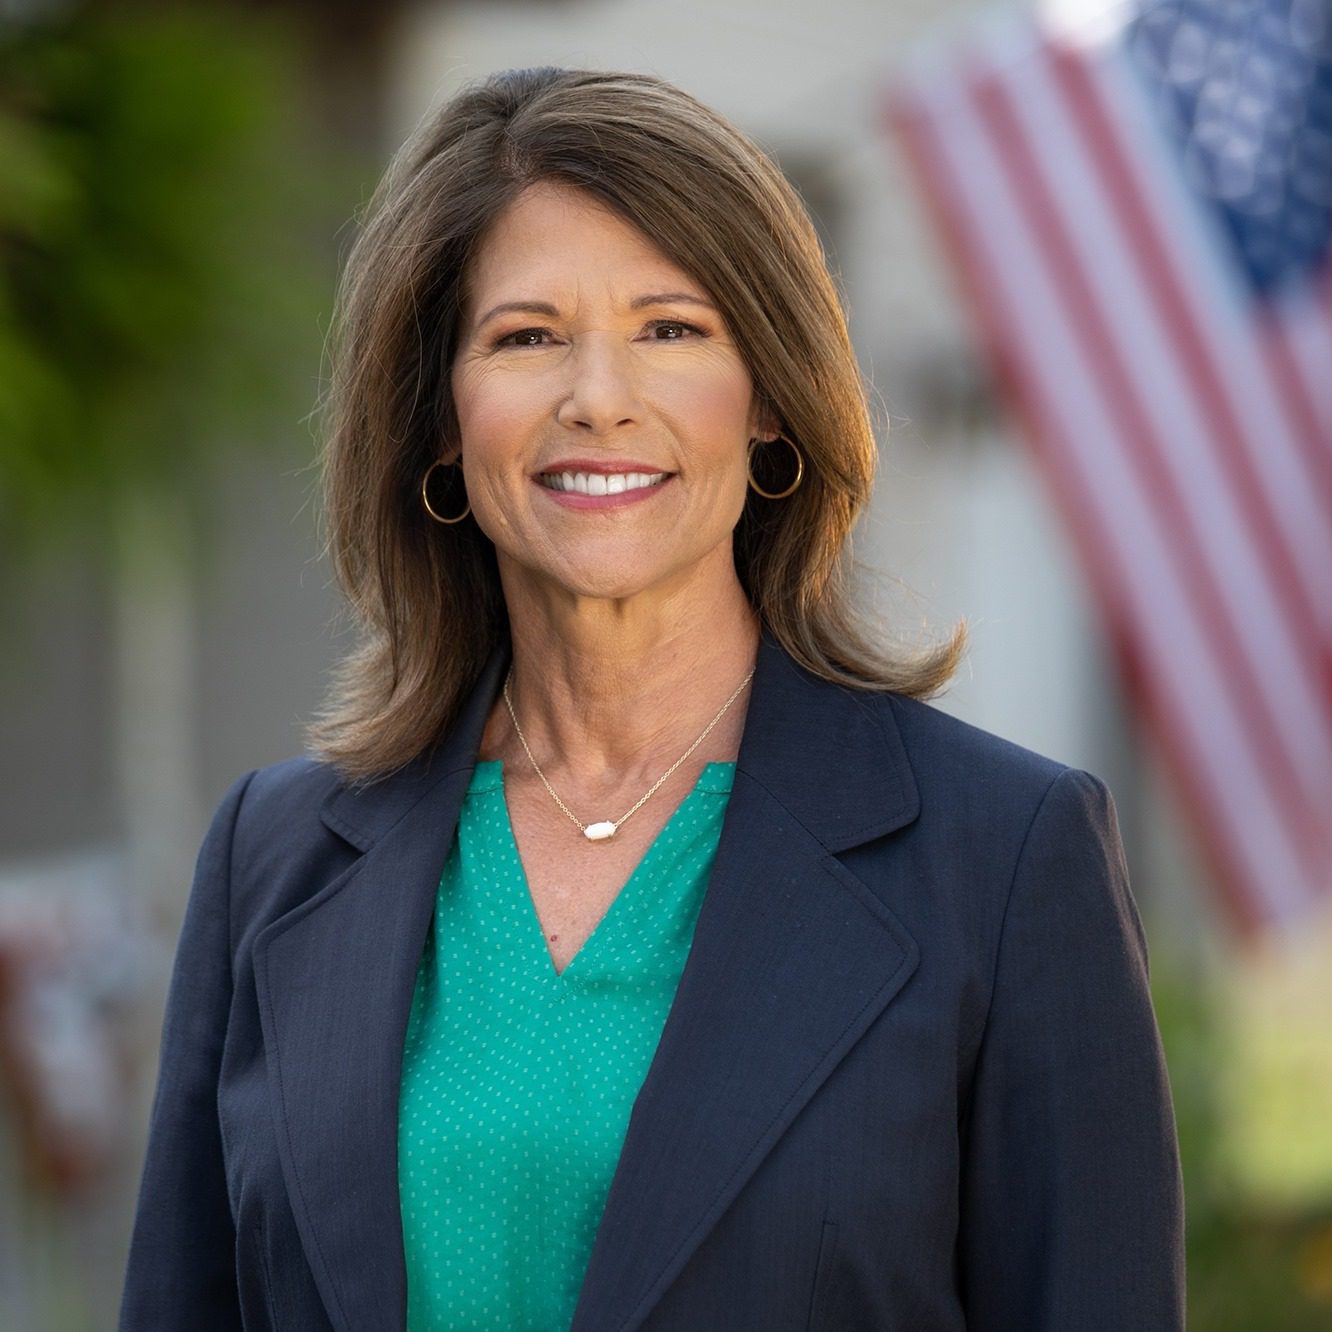 Illinois Congresswoman Bustos Secures Support for Rural Communities